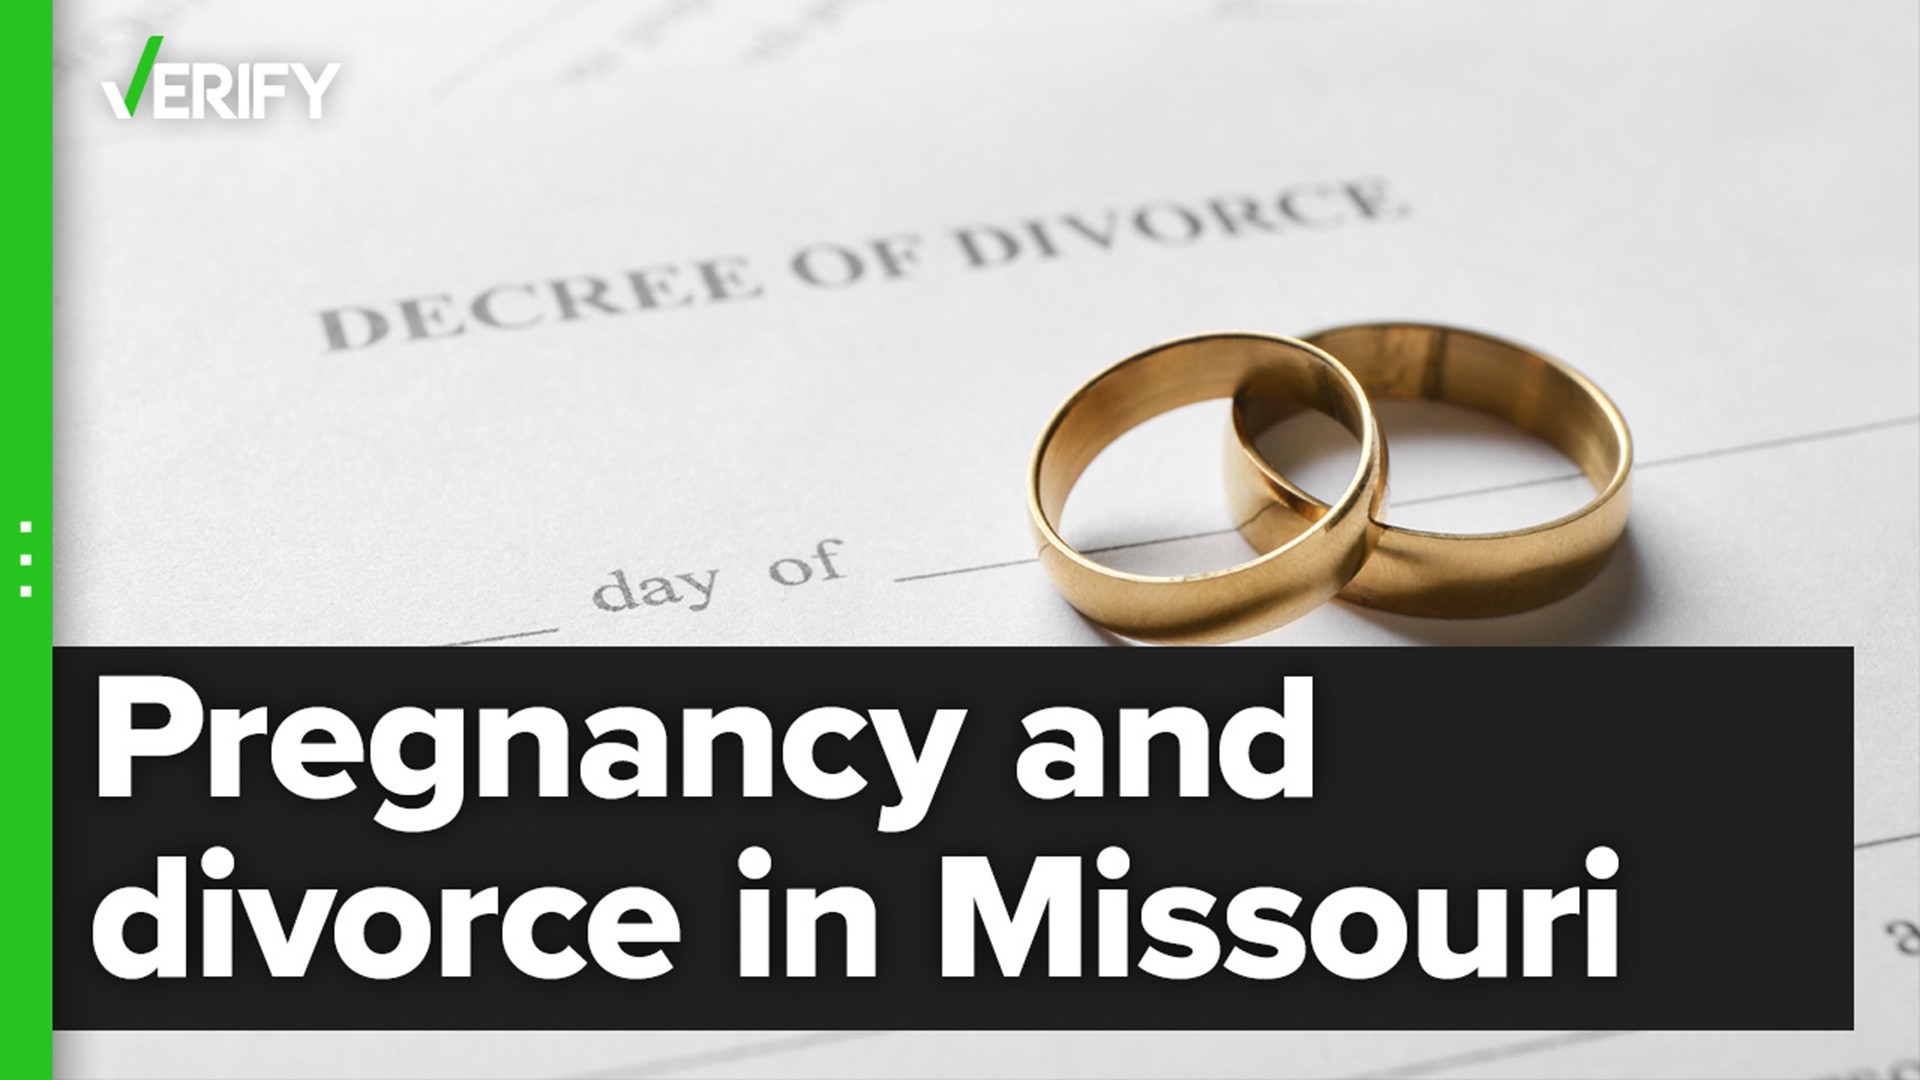 A divorce cannot be legally finalized in Missouri if the wife is pregnant, but spouses can still file for divorce and begin certain aspects of the divorce process.